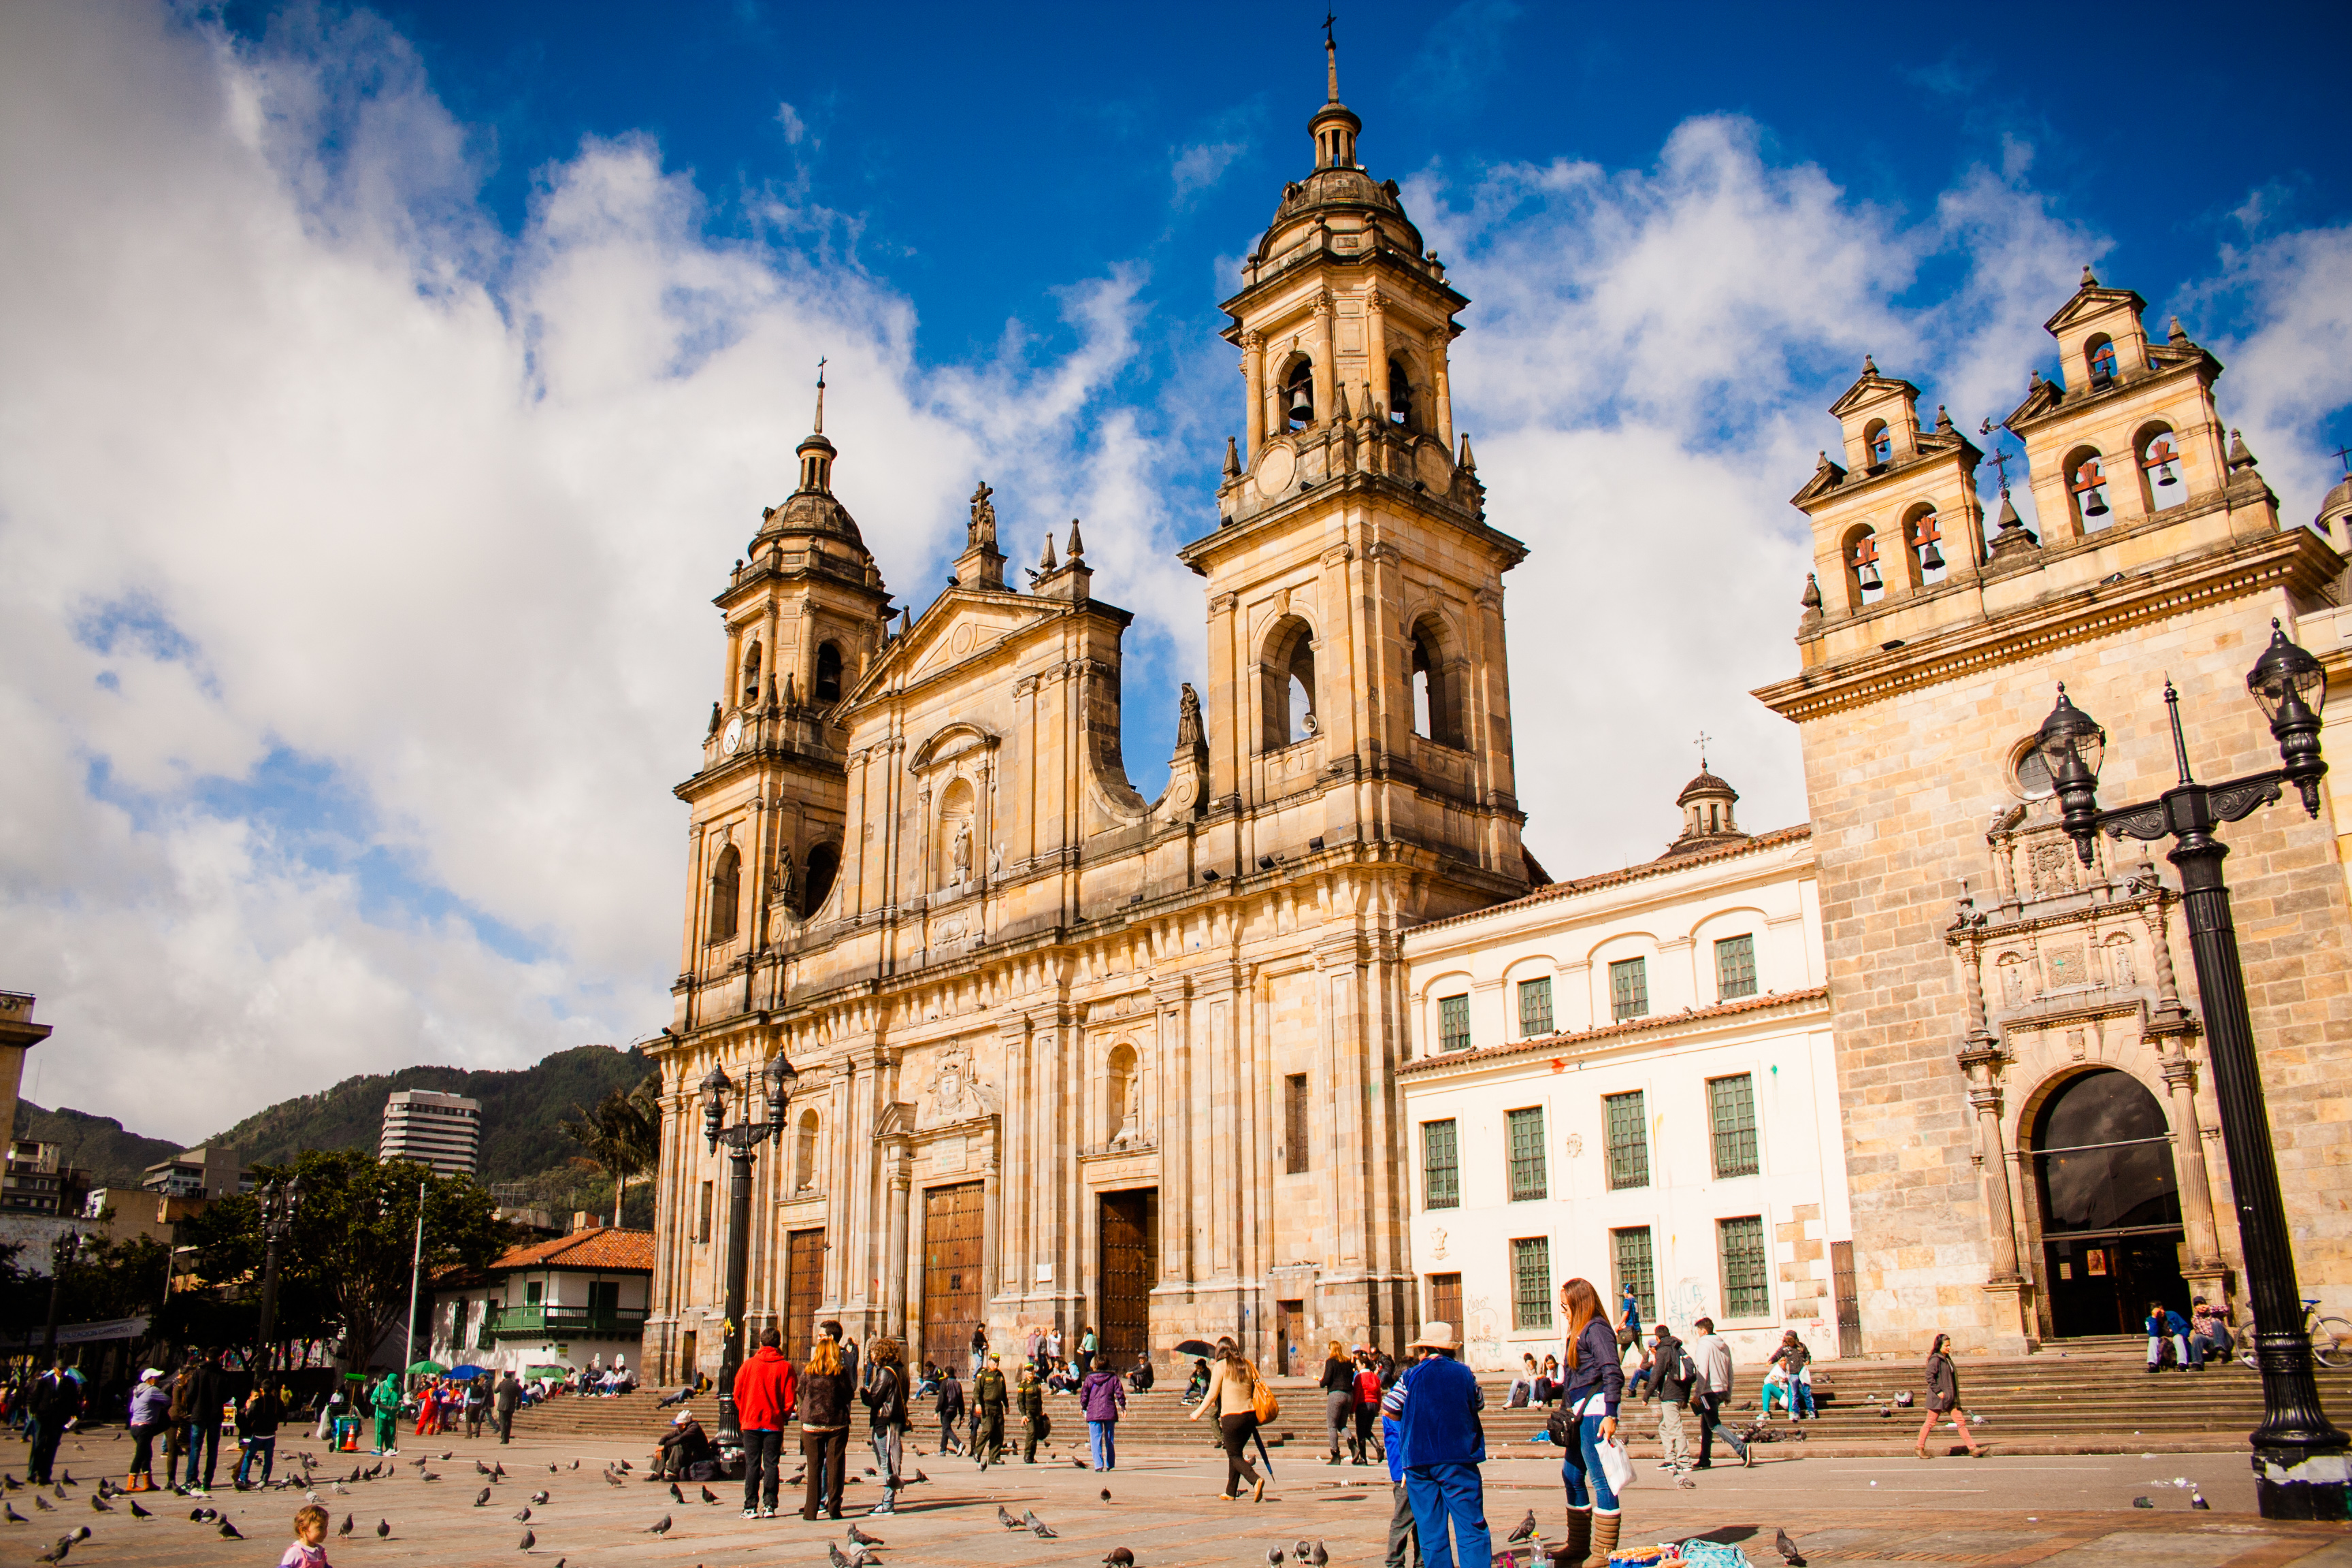 Round-trip flights to Bogota in the $200s and $300s